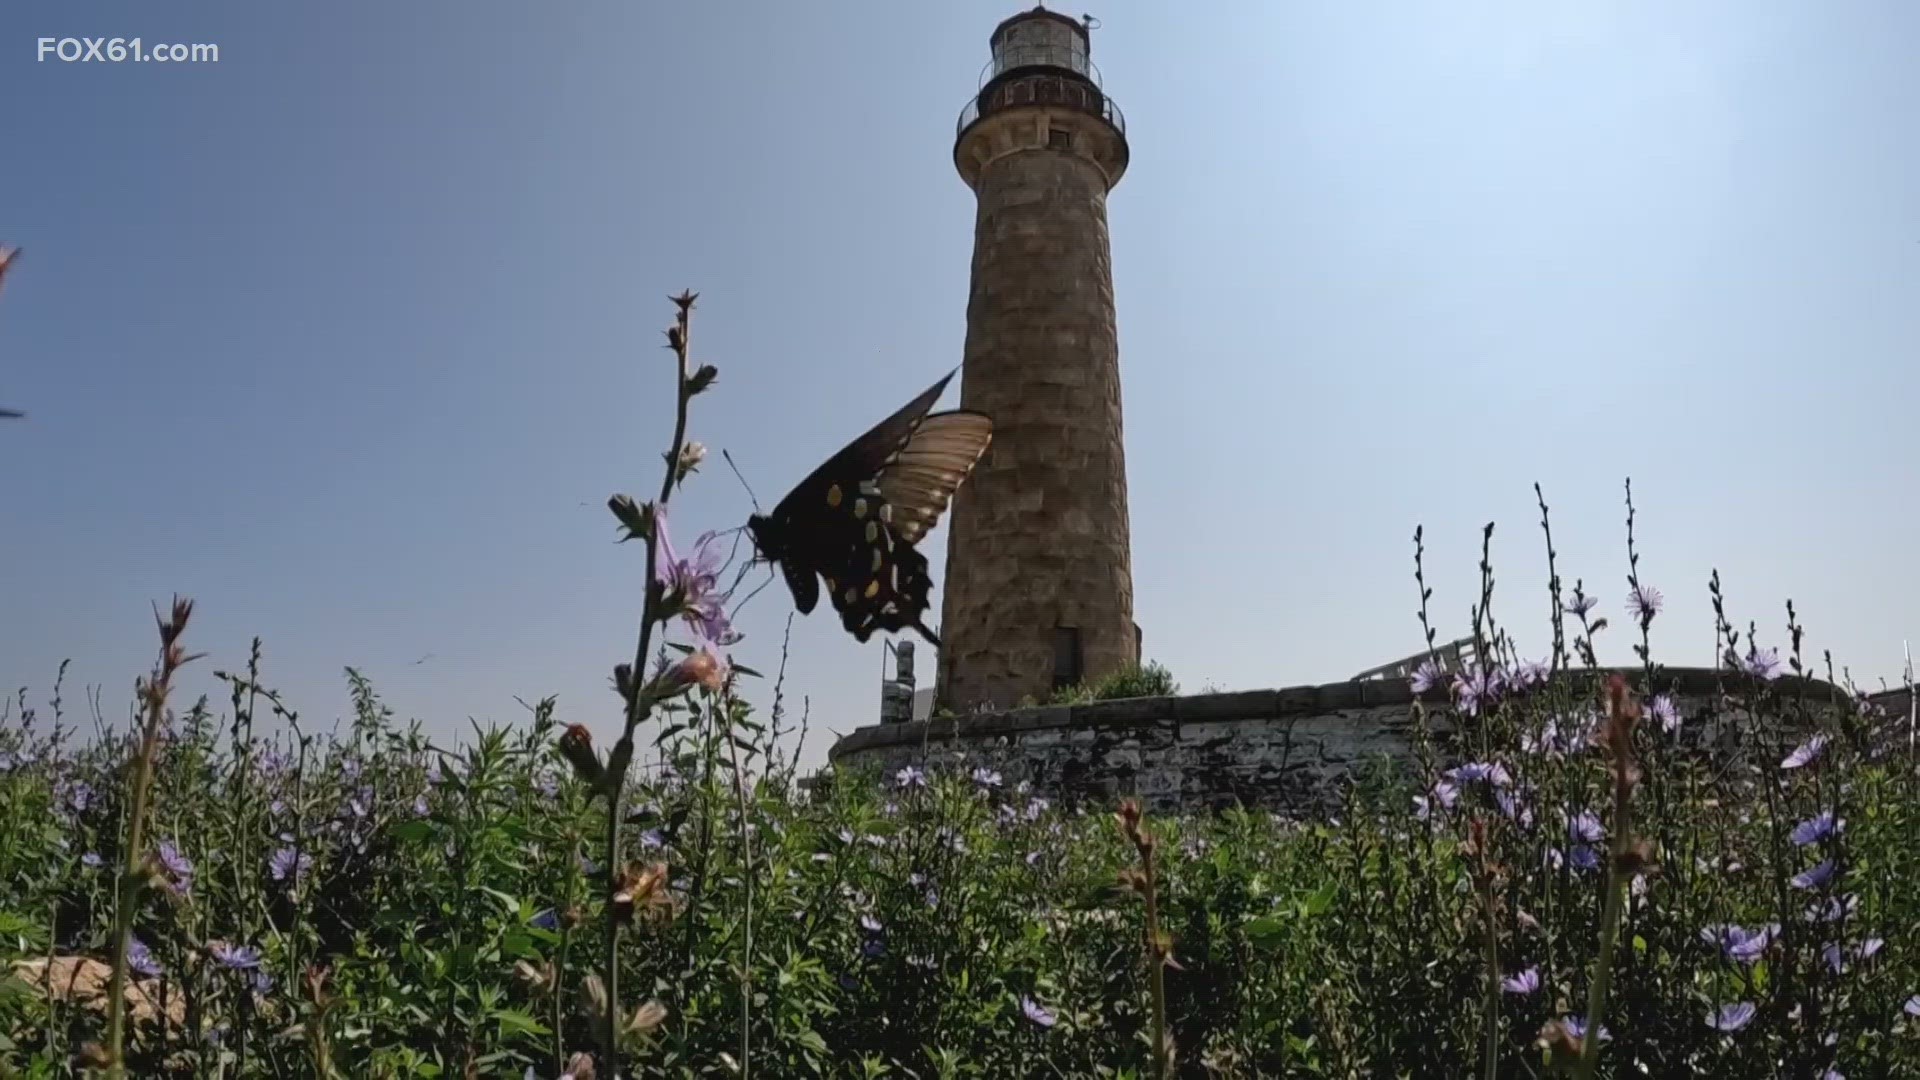 The Little Gull Island Lighthouse, built in 1868, is 91 feet tall is still fully operational, and is also home to rare birds and playful gray seals.